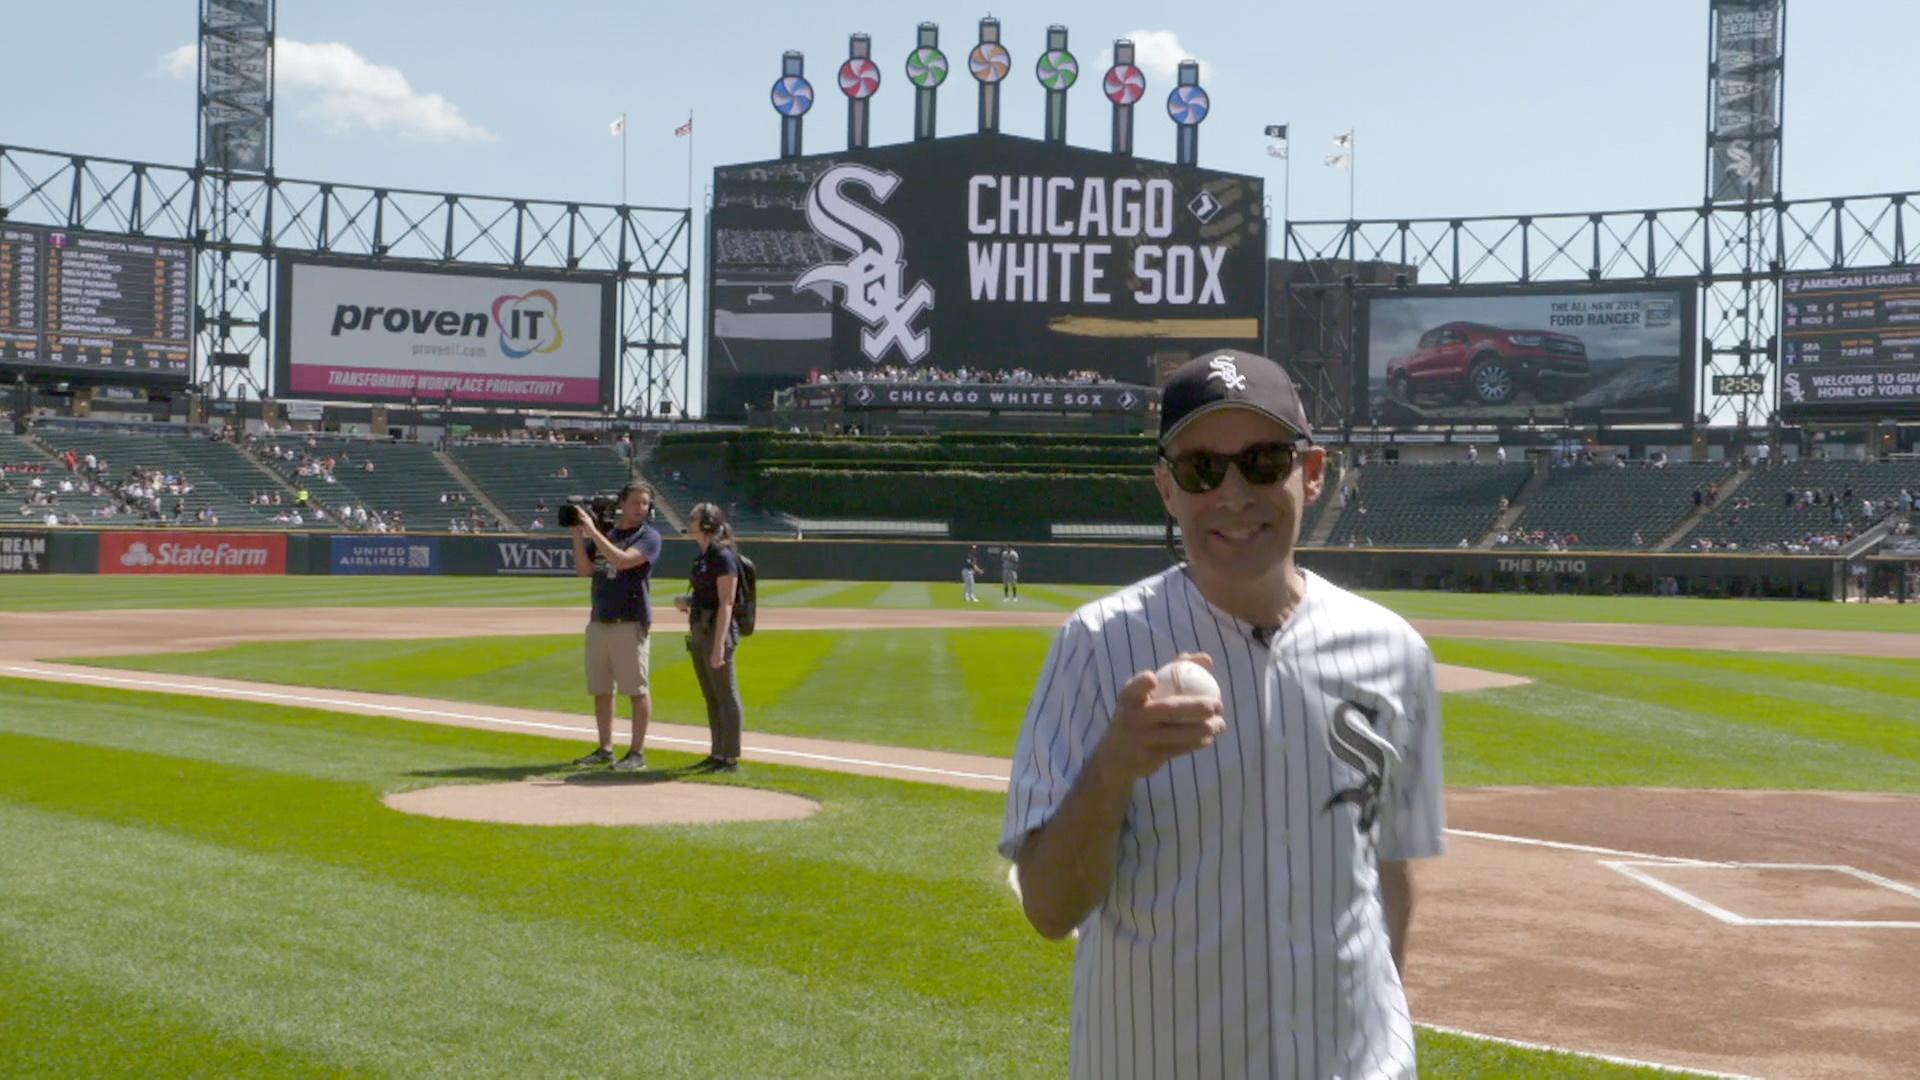 Chicago White Sox: What it's like in bleachers at Guaranteed Rate Field